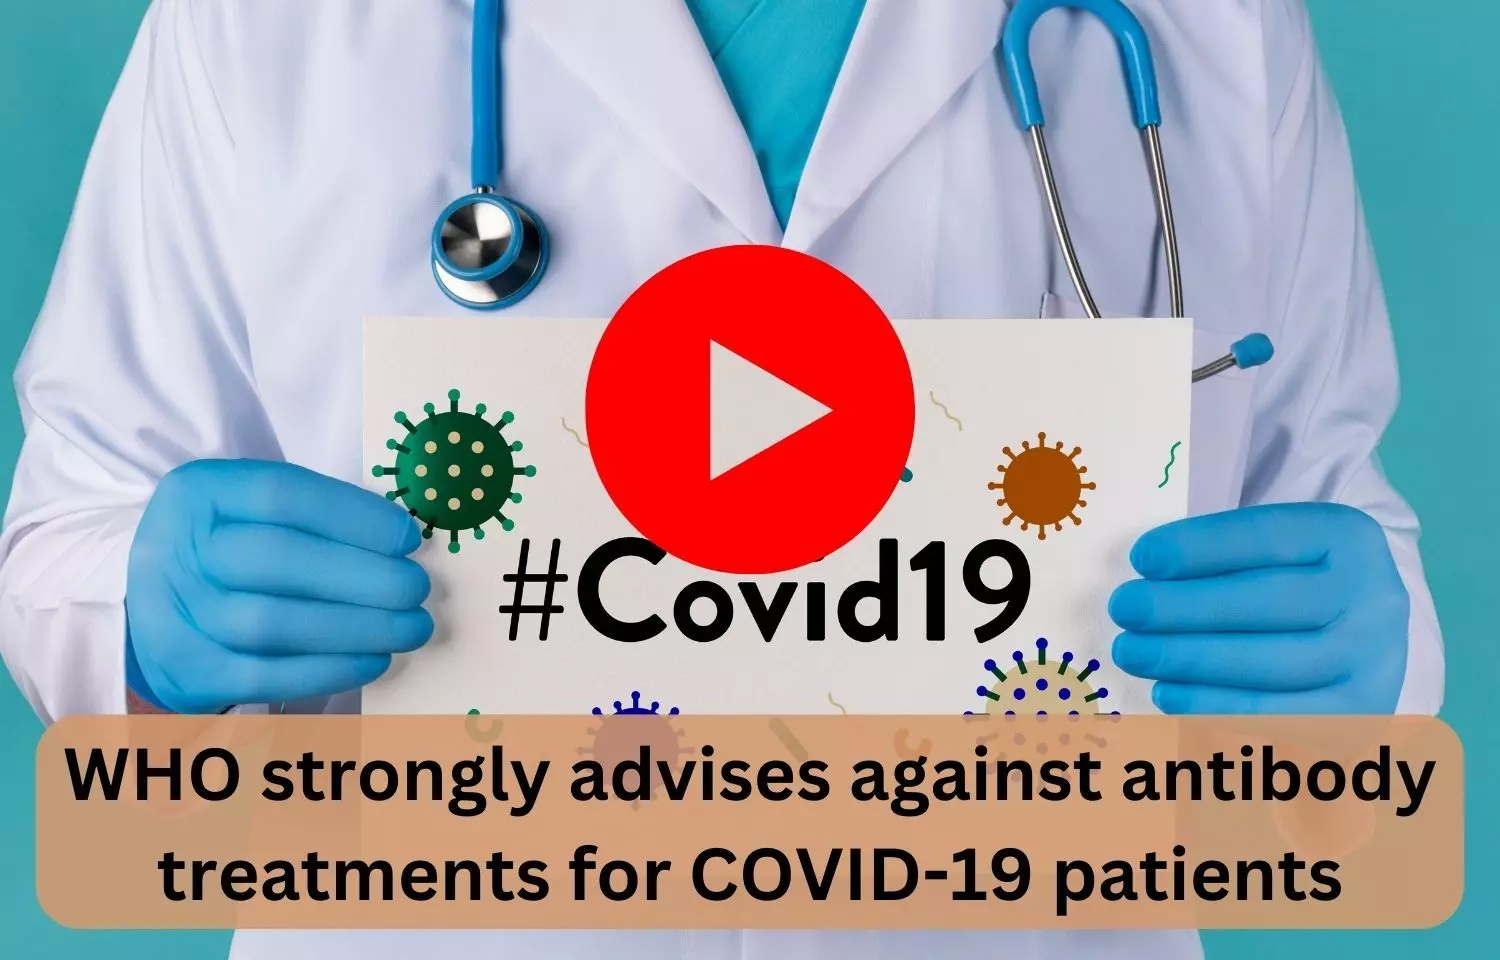 WHO strongly advises against antibody treatments for COVID-19 patients